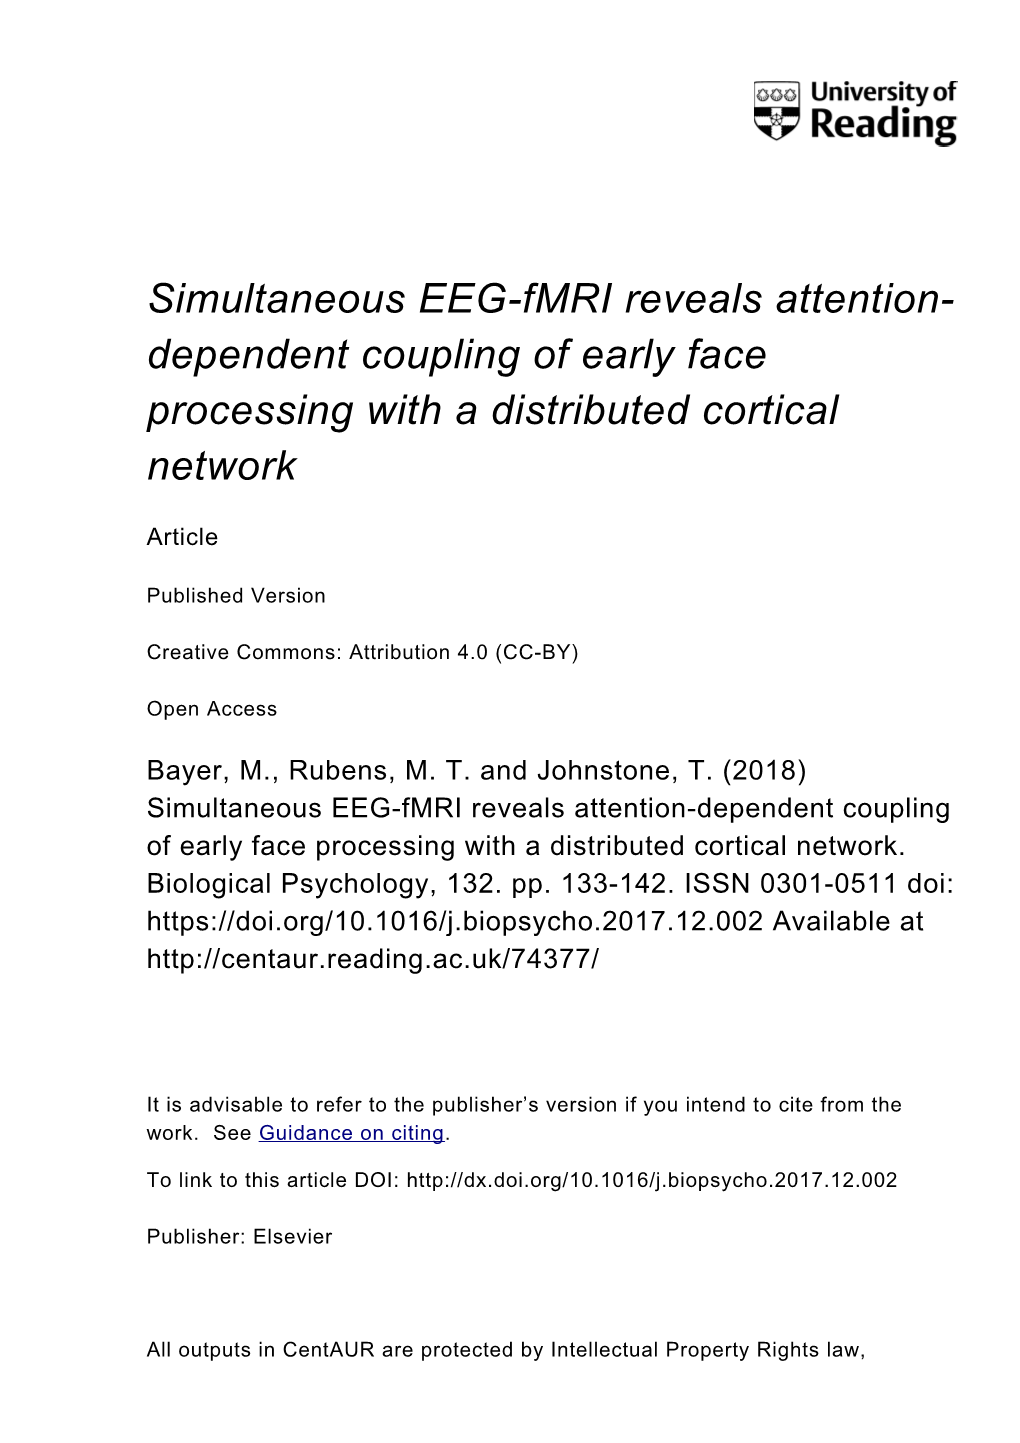 Simultaneous EEG-Fmri Reveals Attention-Dependent Coupling of Early Face Processing with a Distributed Cortical Network